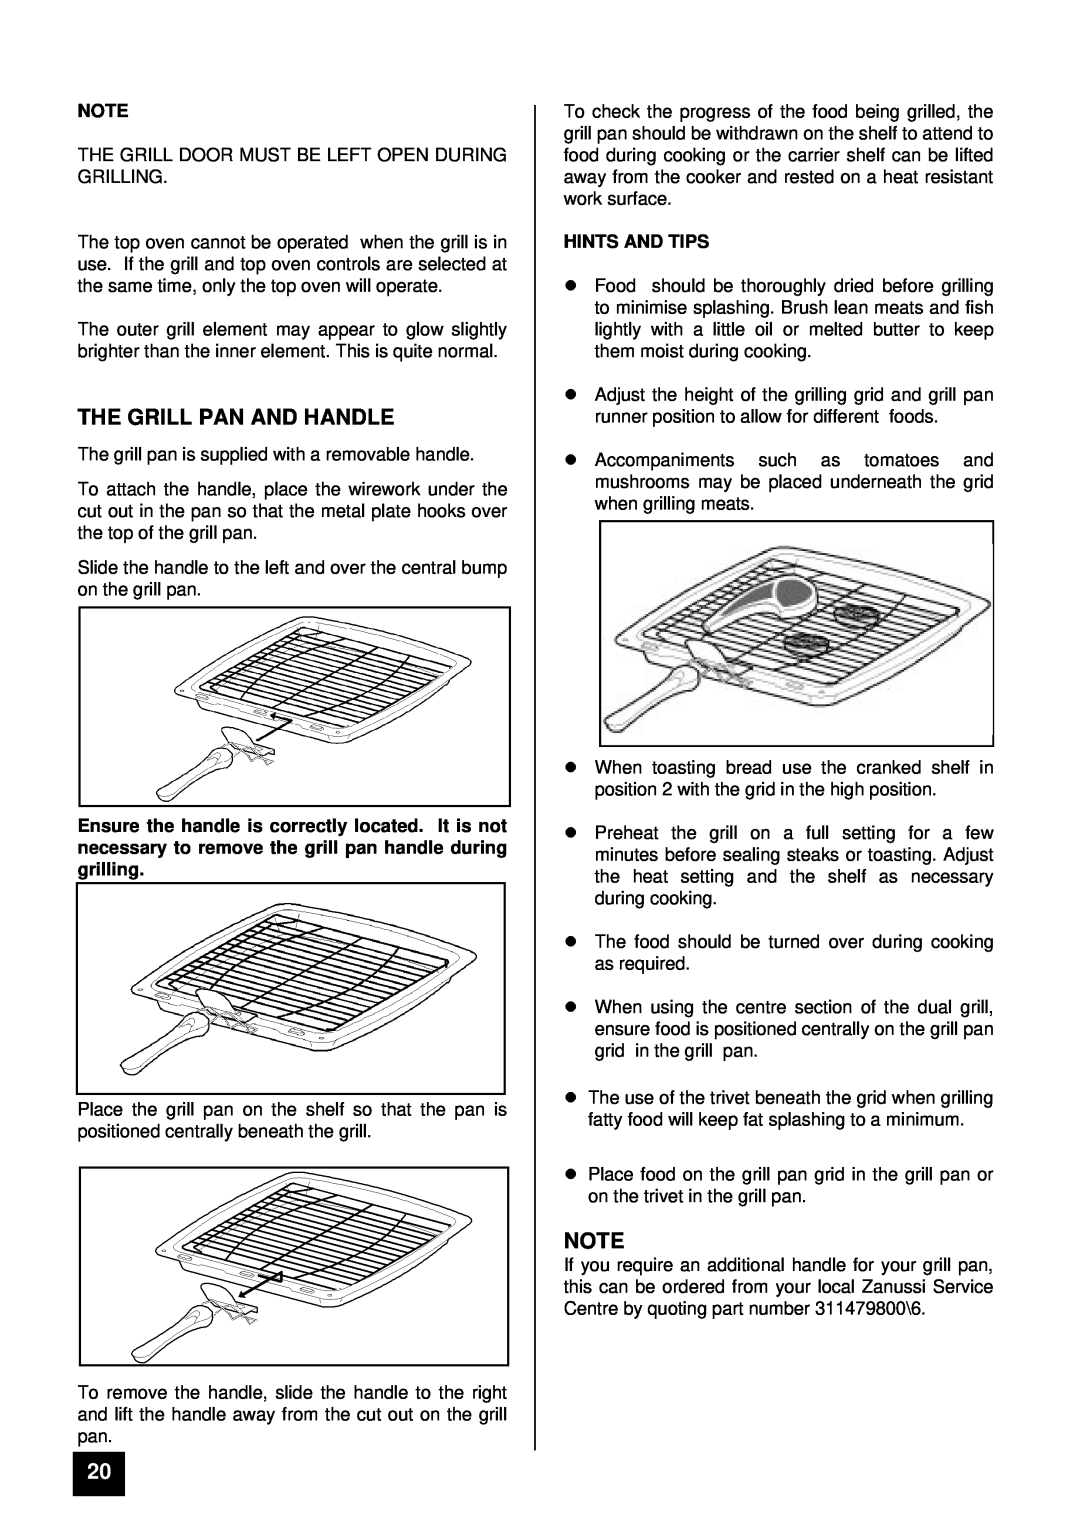 Zanussi ZCE 7800, ZCE 7600 manual The Grill Pan And Handle, Hints And Tips 